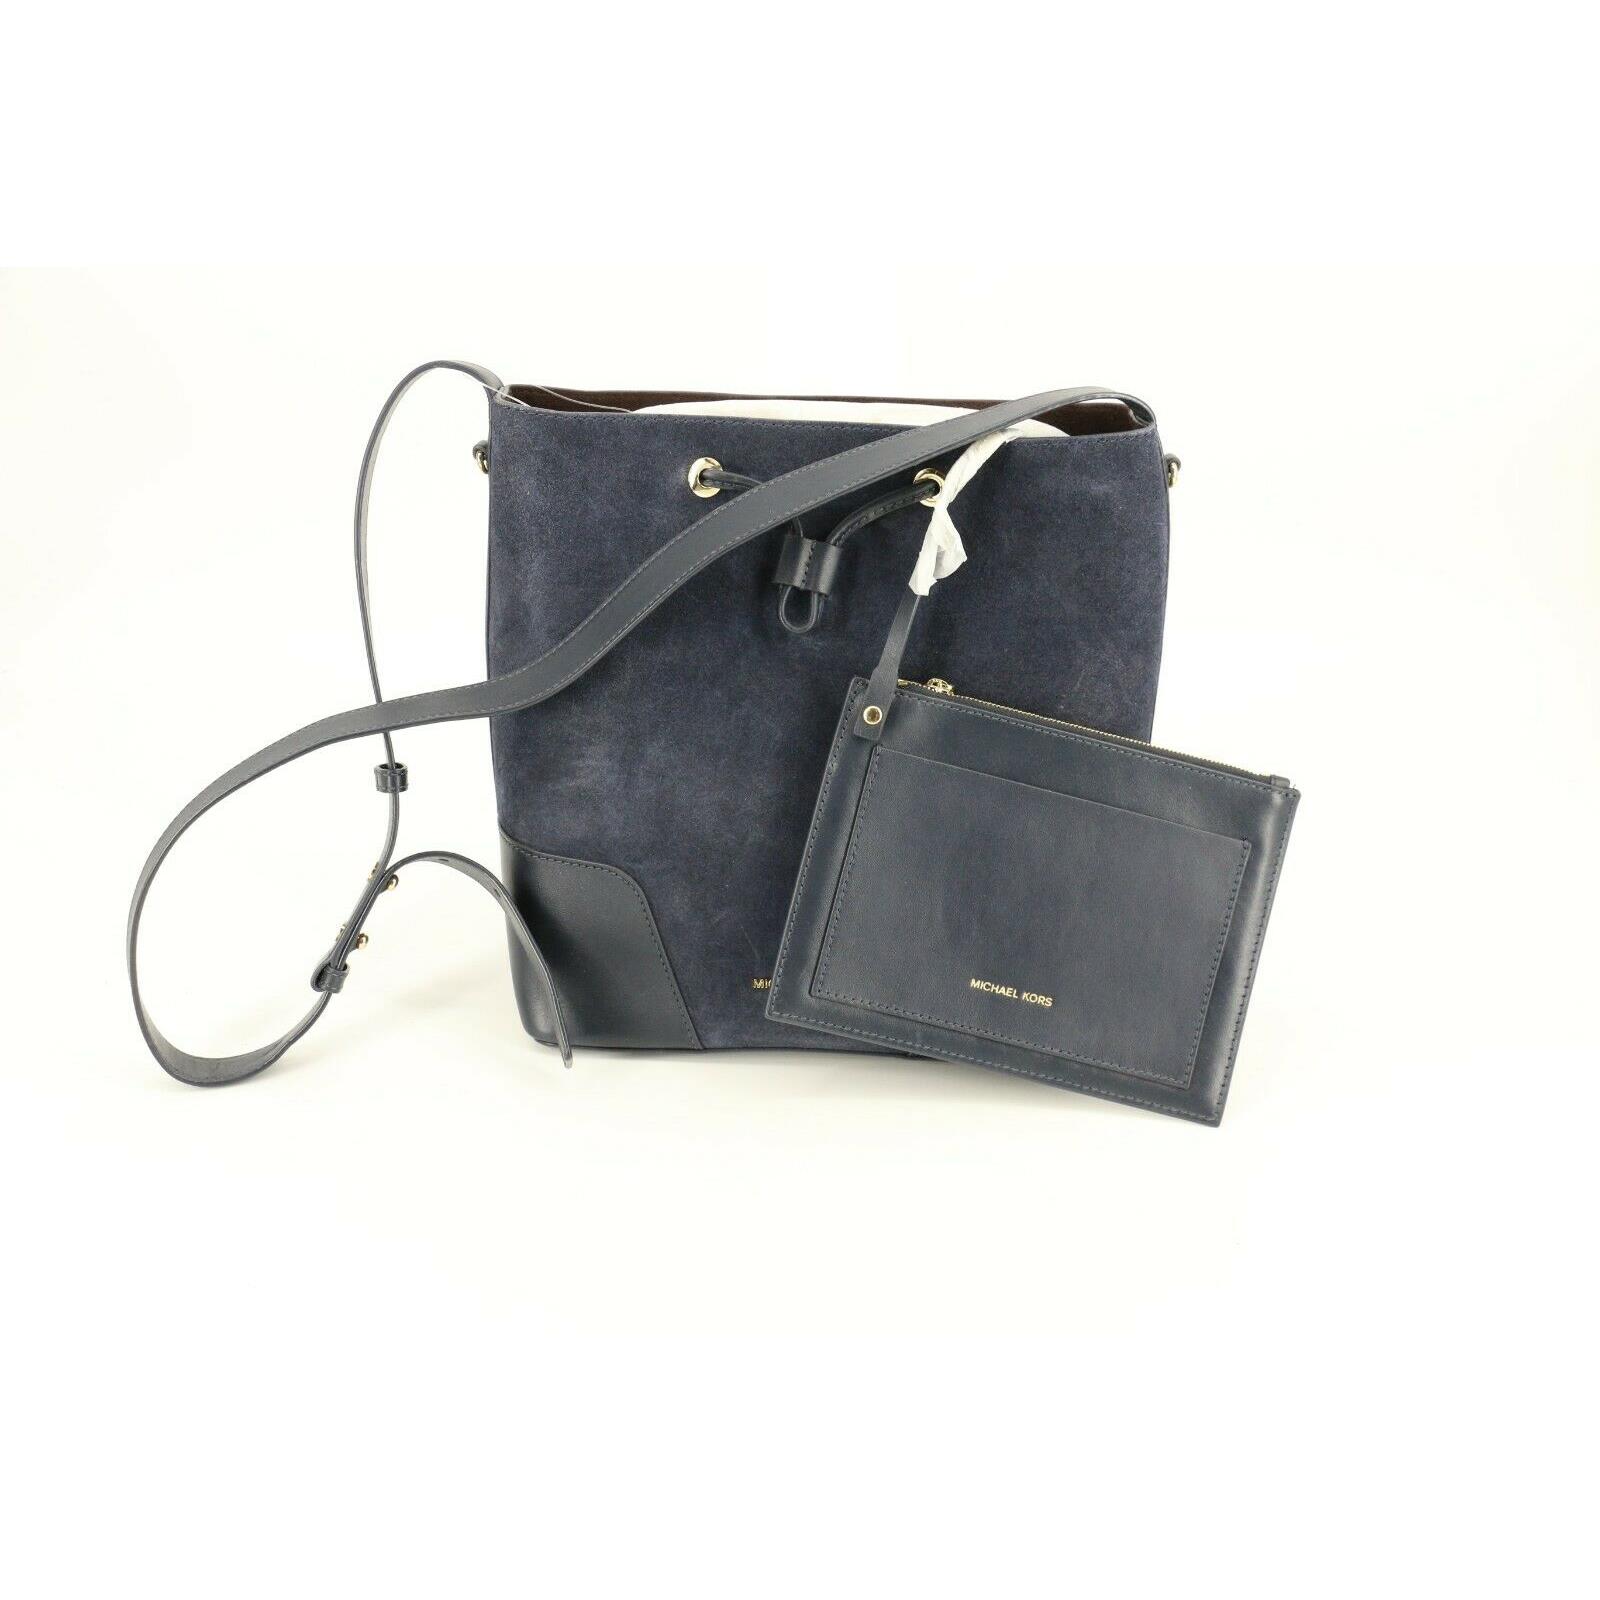 Michael Kors Cary Medium Bucket Bag Purse Admiral Navy Blue Suede Leather